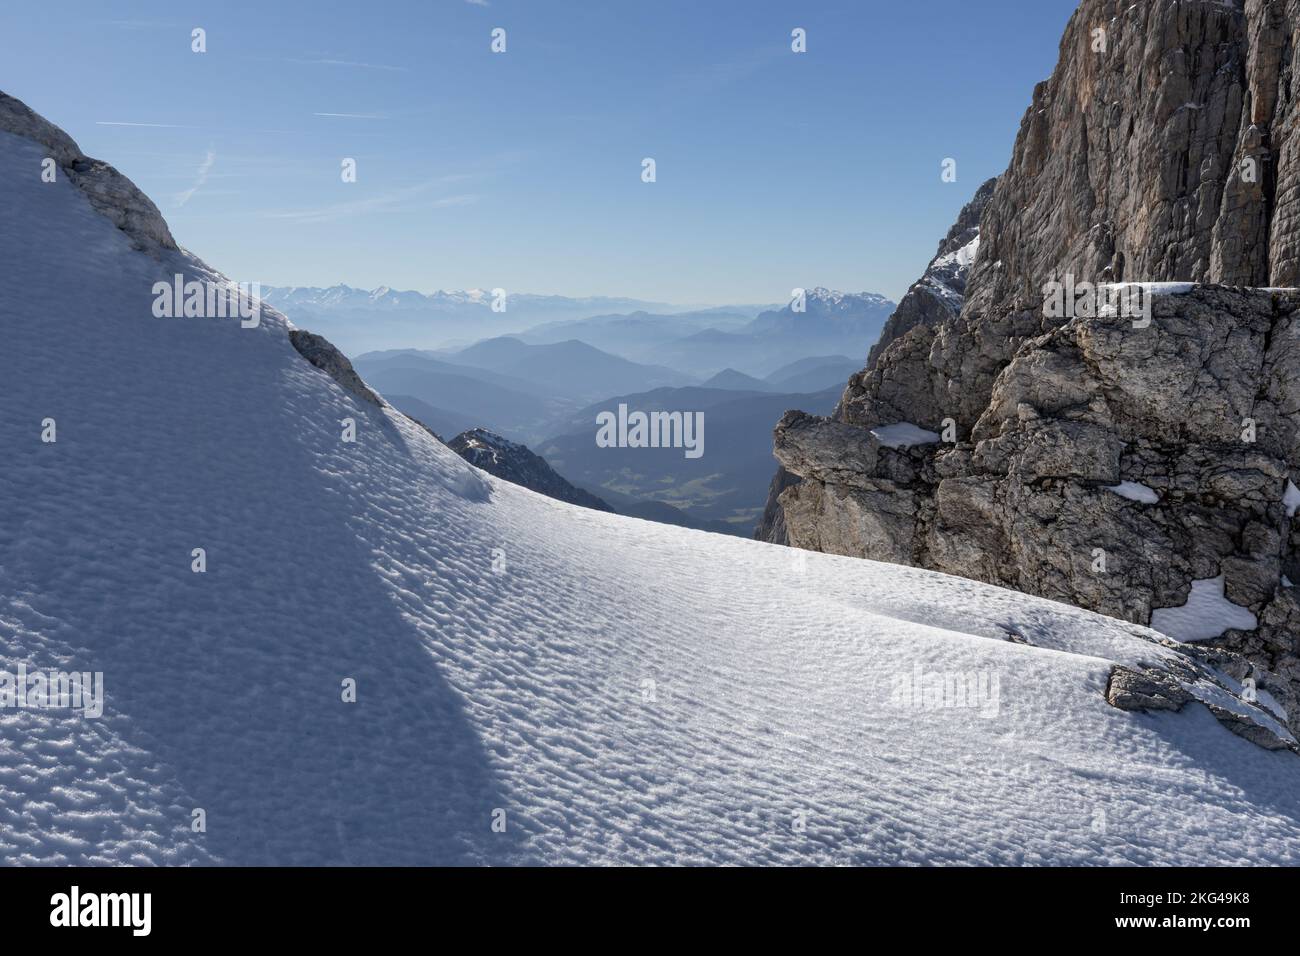 Strong crust on a mountain near one of the peaks in the Dachstein region, Austrian Alps Stock Photo